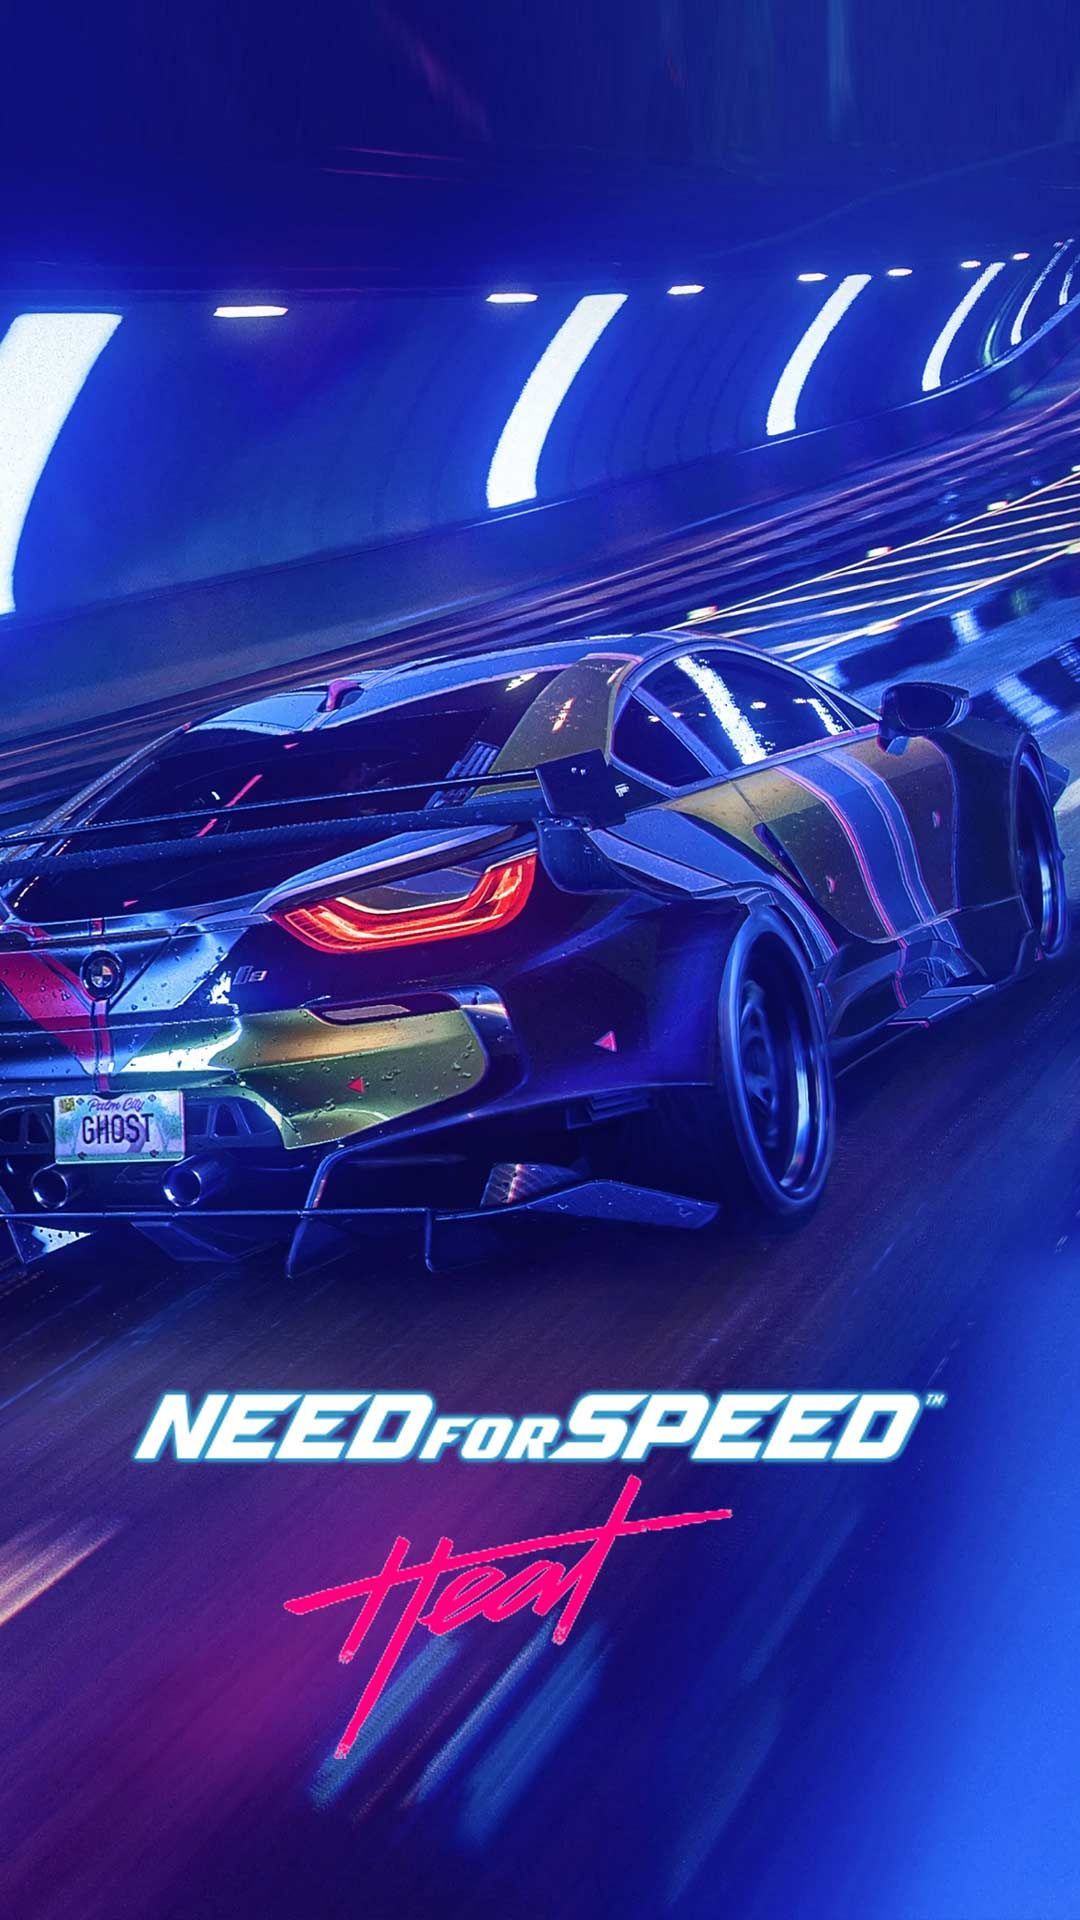 Need for speed heat wallpaper HD phone background Cars Poster art on iPhone android lock screen. Need for speed cars, Need for speed, HD phone background